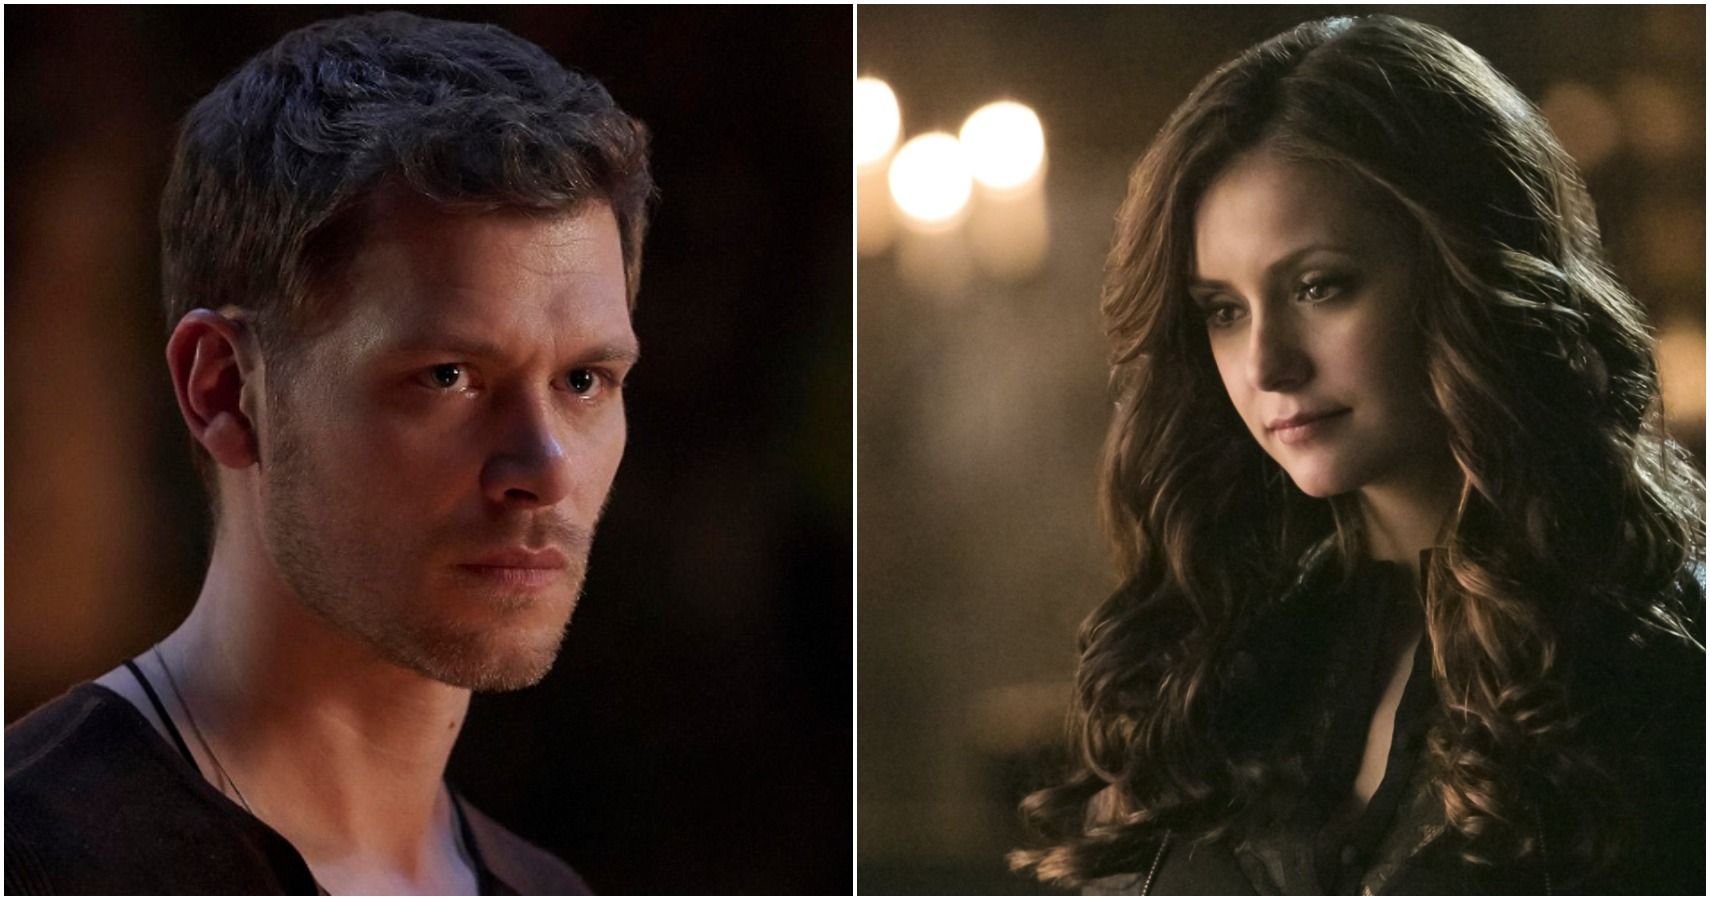 The Vampire Diaries 5 Times Klaus Was The Biggest Bad Guy In Mystic Falls (& 5 Times It Was Katherine)